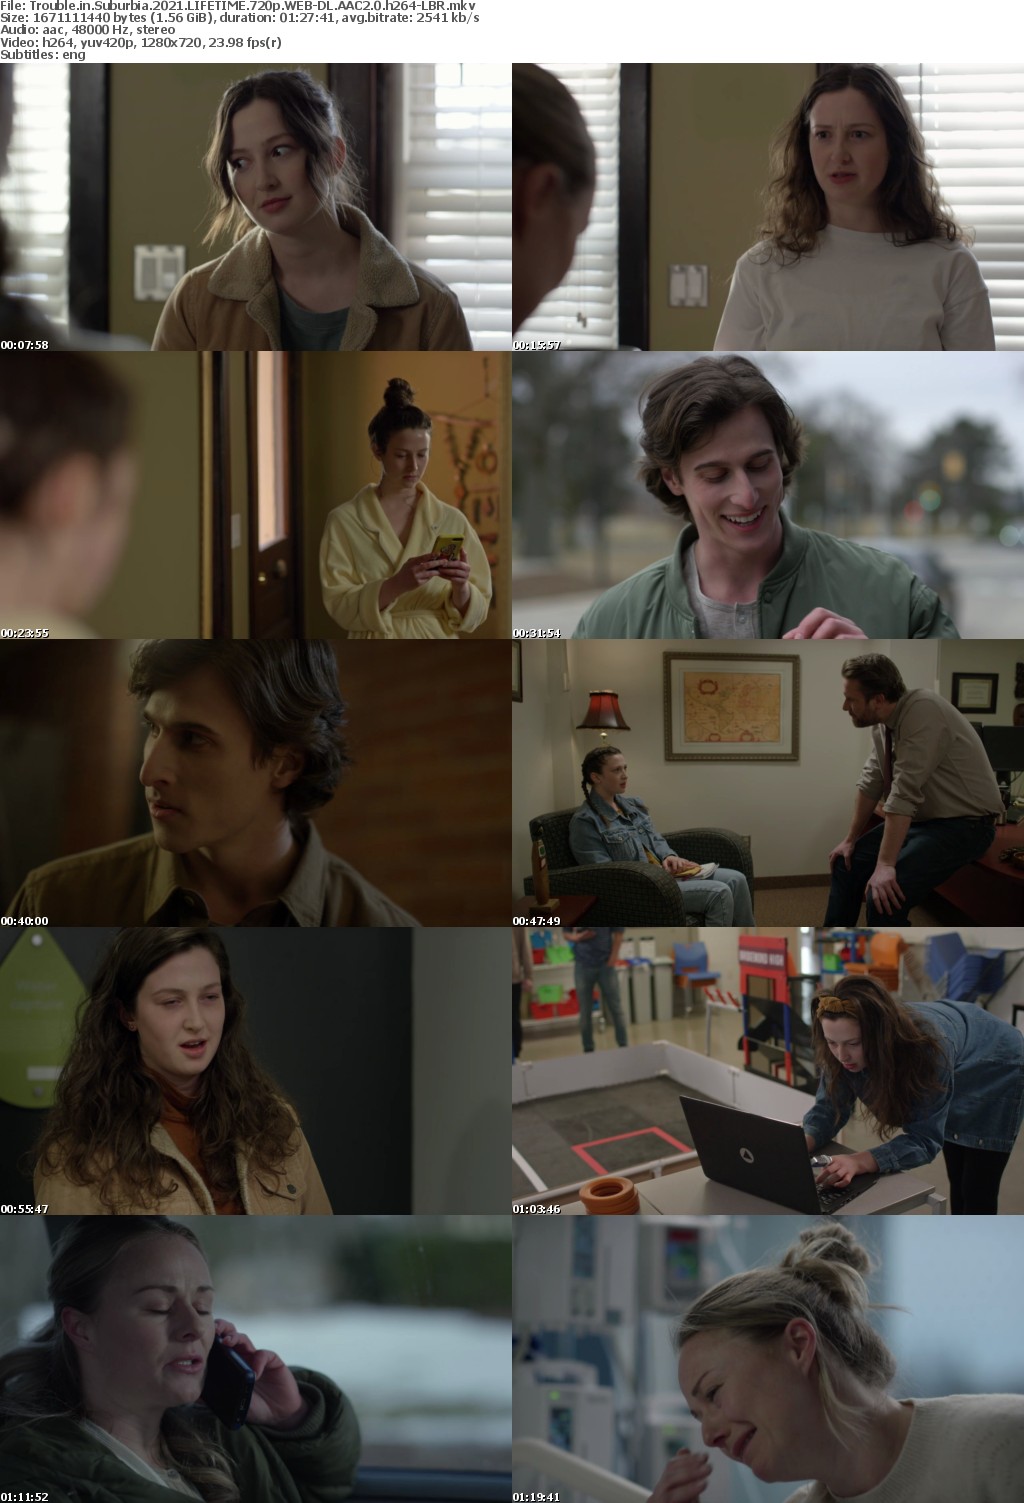 Trouble In Suburbia 2021 LIFETIME 720p WEB-DL AAC2 0 H264-LBR